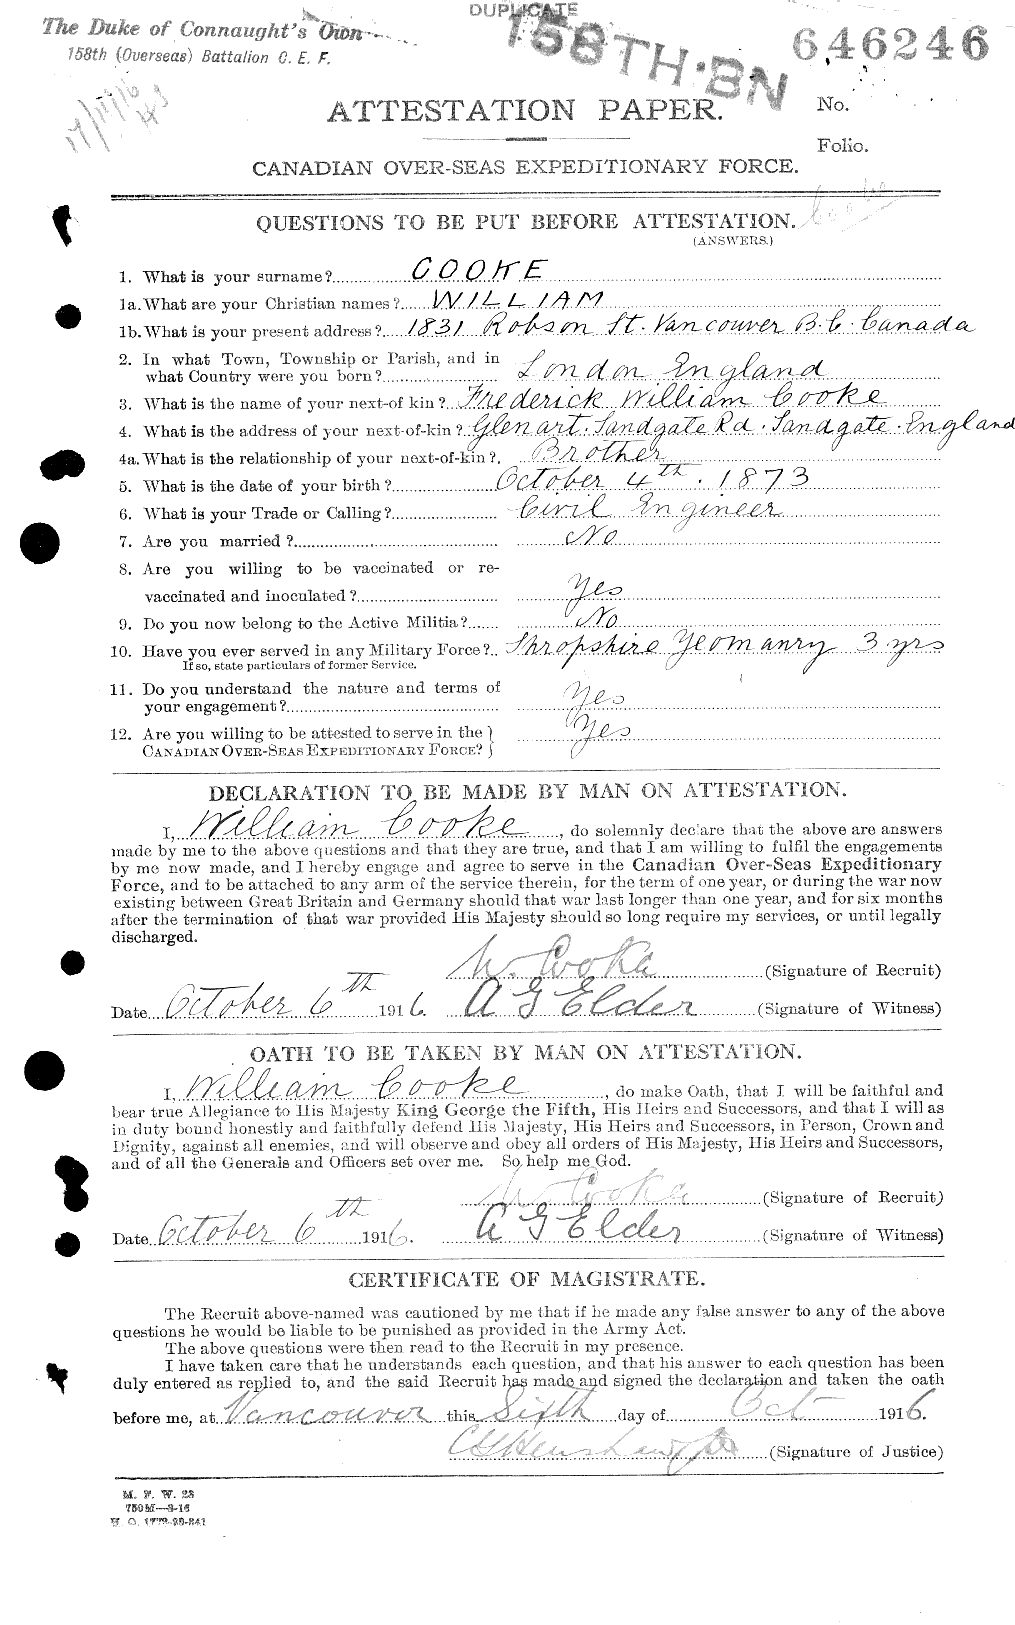 Personnel Records of the First World War - CEF 039104a